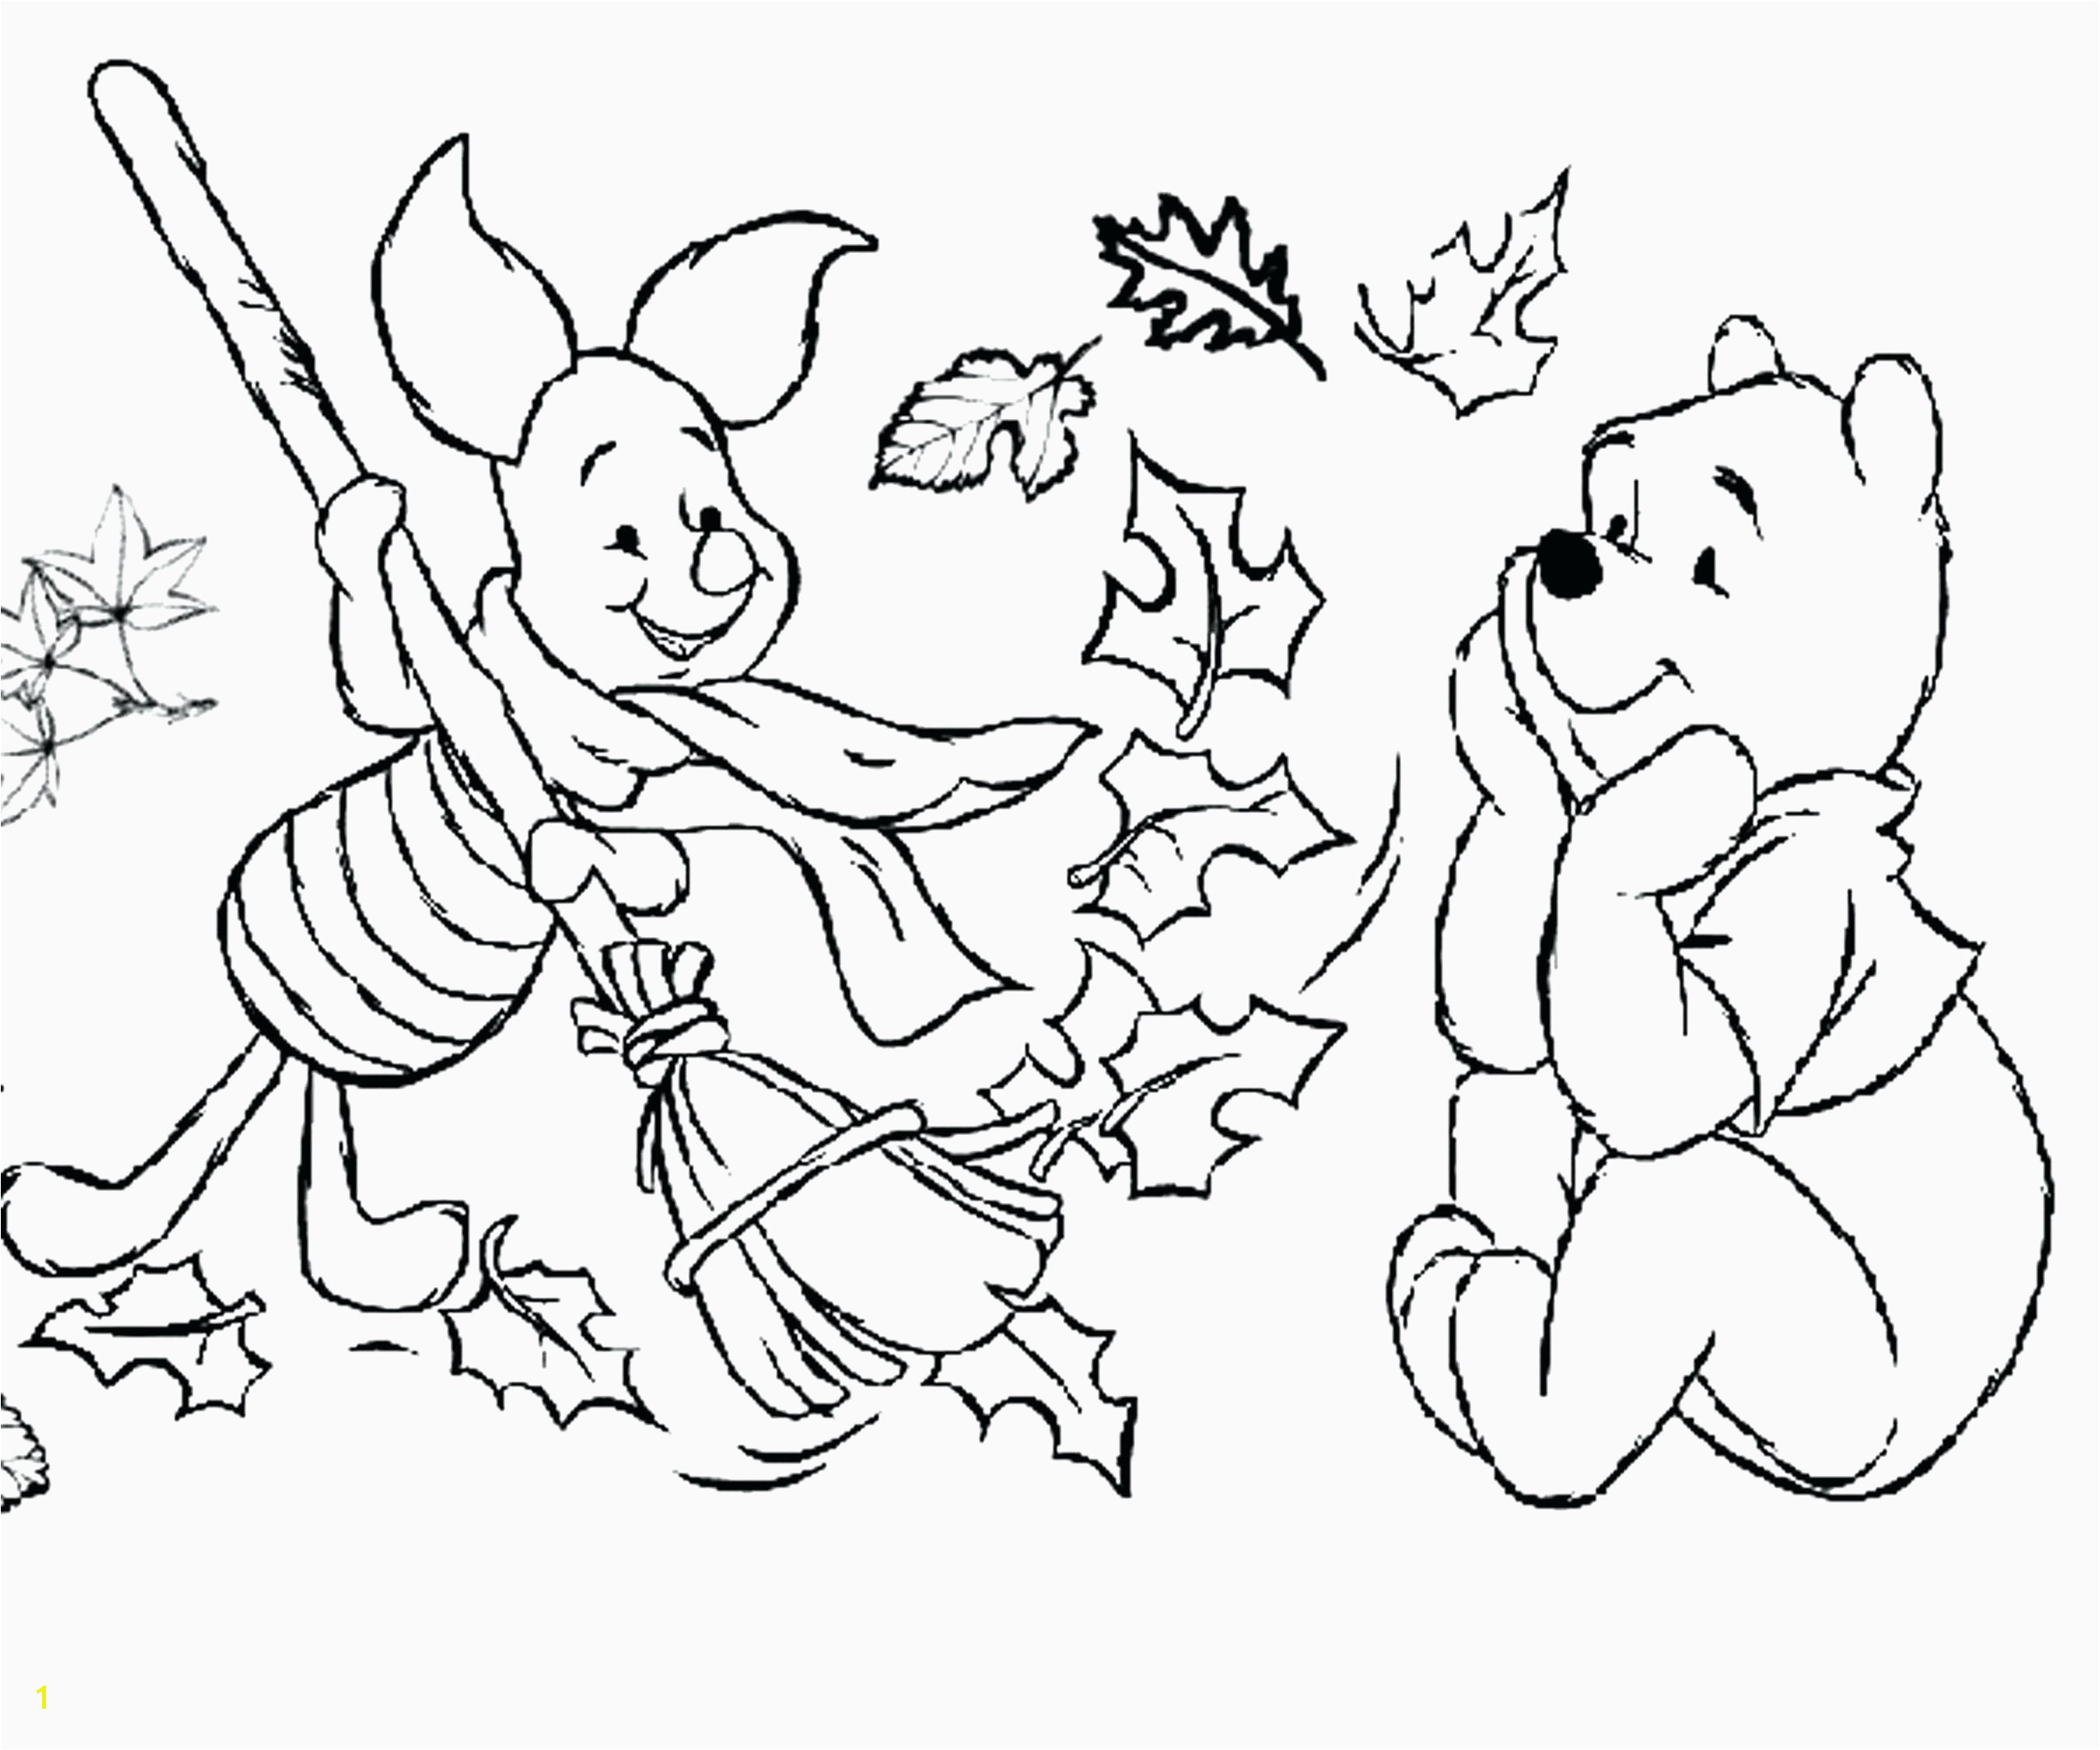 John Cena Coloring Pages to Print Awesome Cool Coloring Page Unique Witch Coloring Pages New Crayola